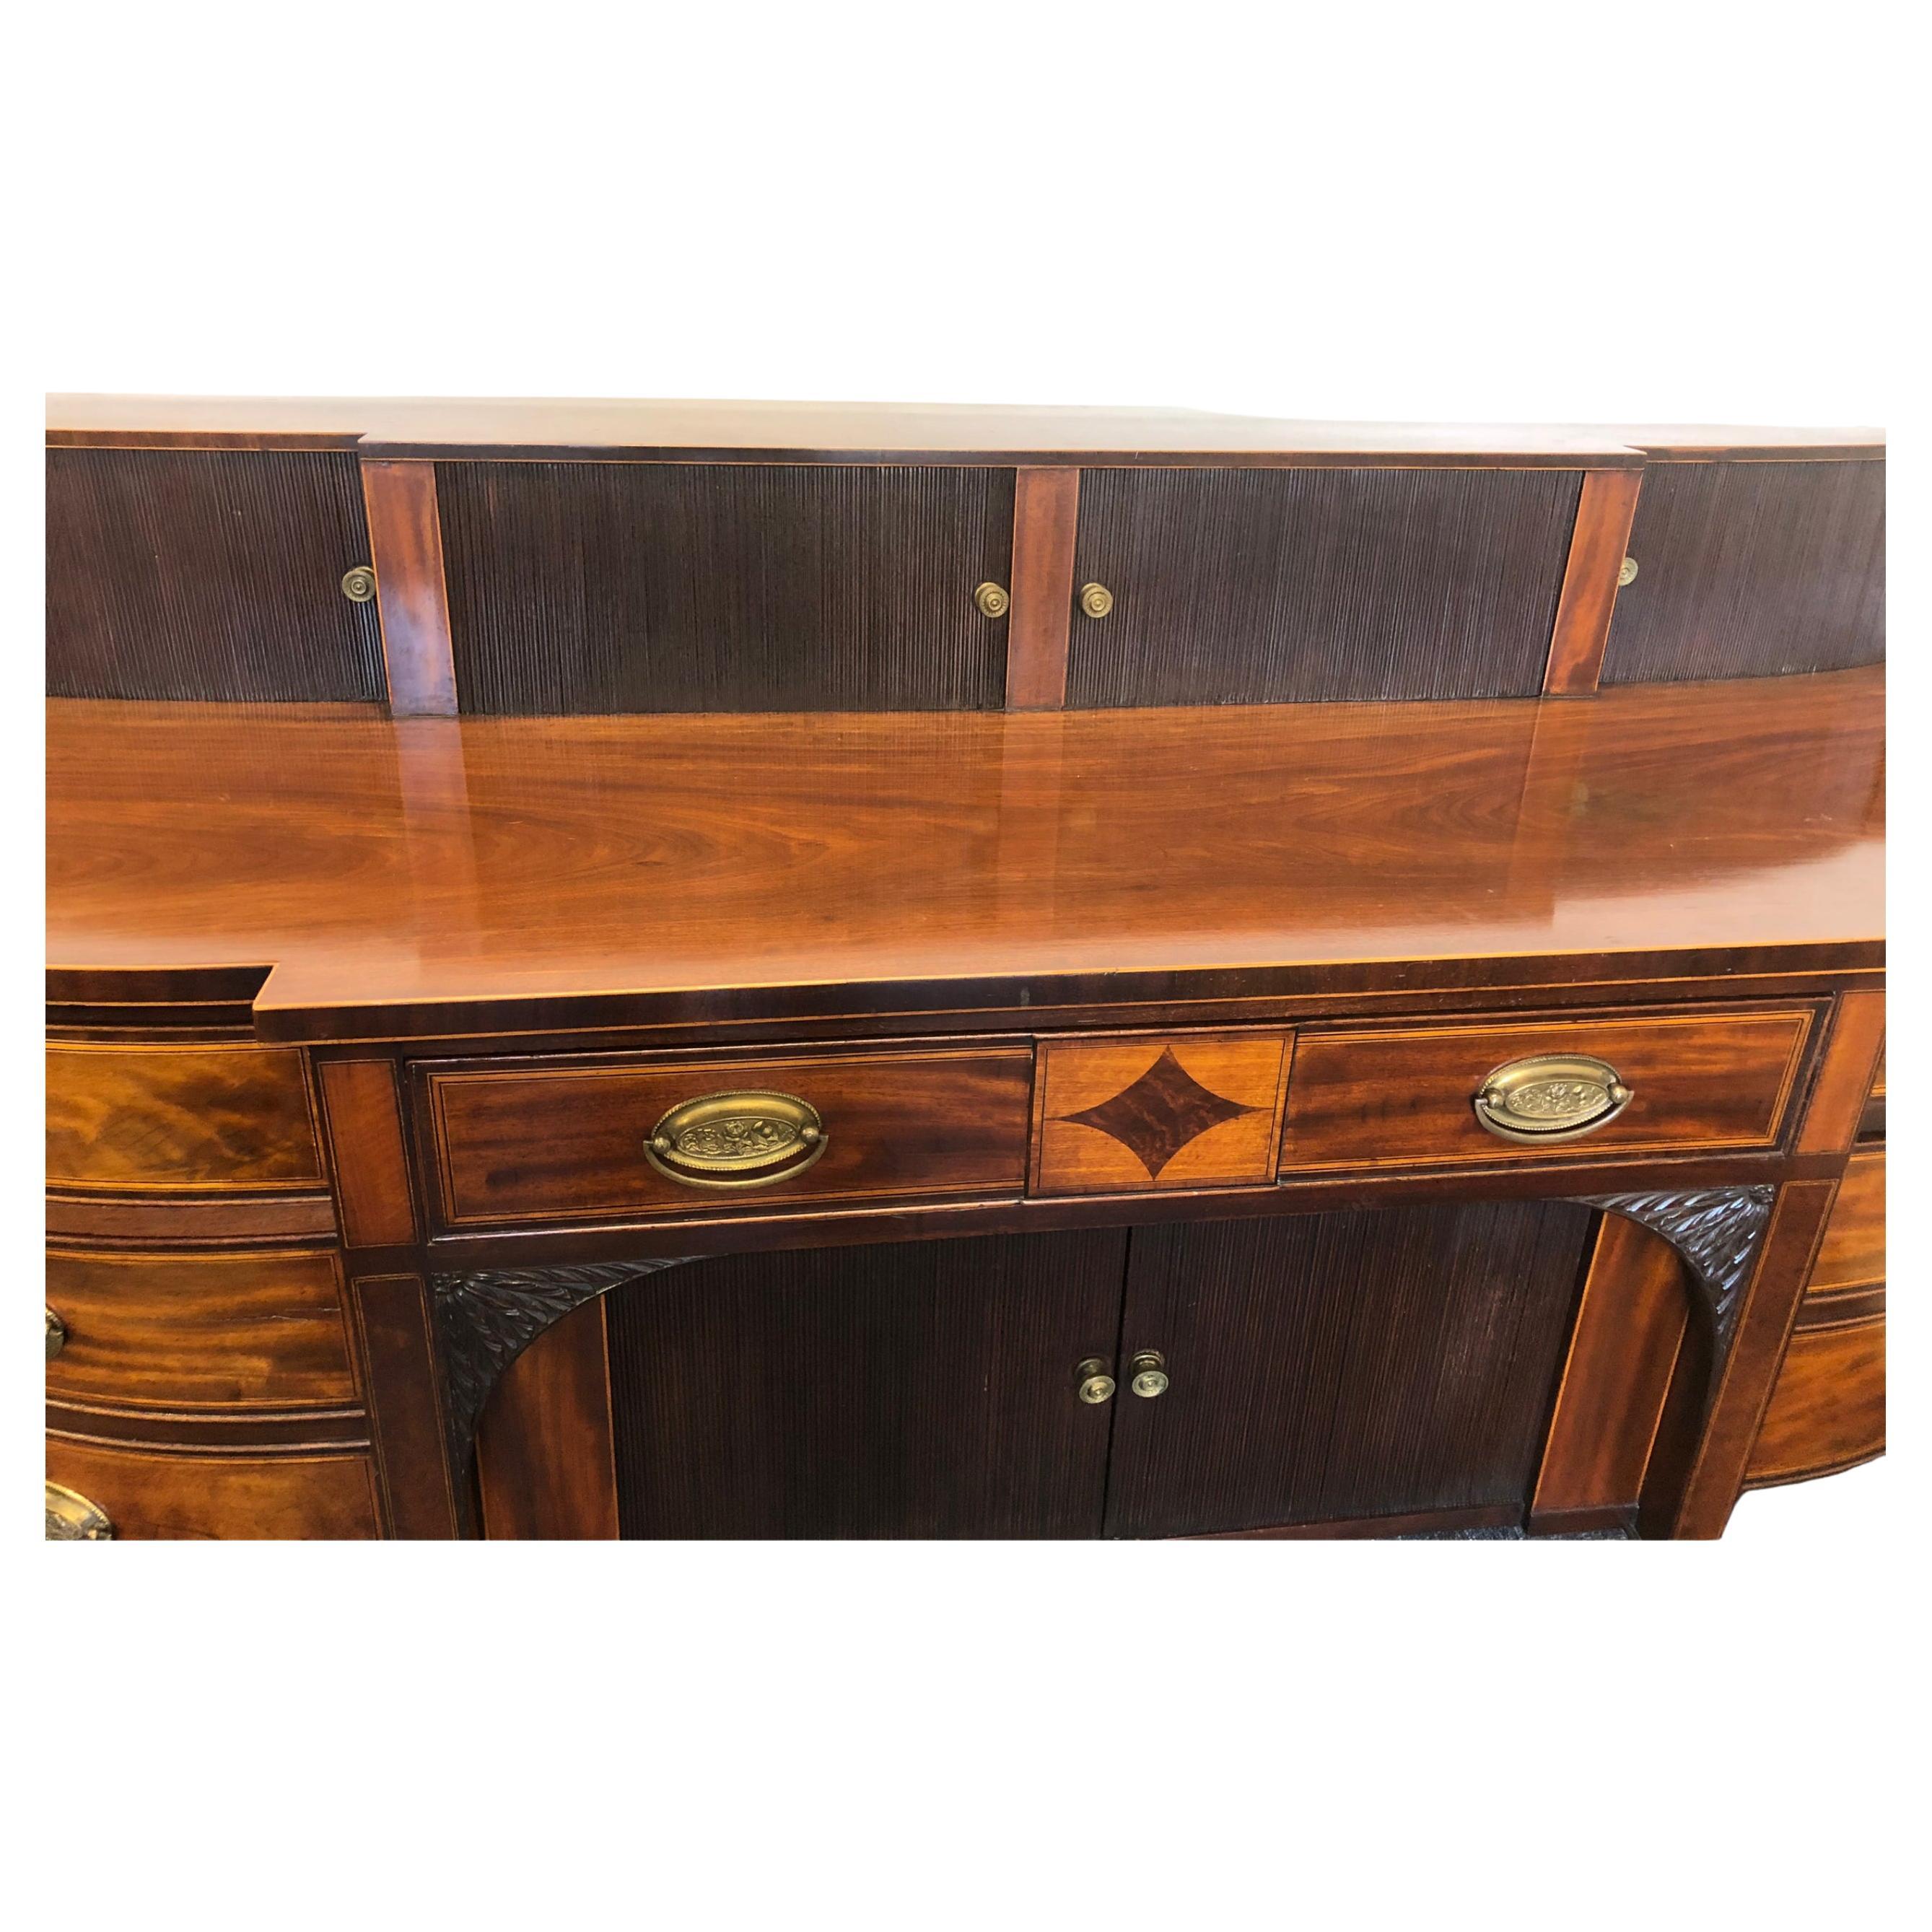 A fine quality mahogany Georgian Scottish sideboard with a stepped raised upper section and typical Scottish design. Featuring sliding tambour doors on the upper and lower sections. Squared tapered legs with carved capitals and period brasses.